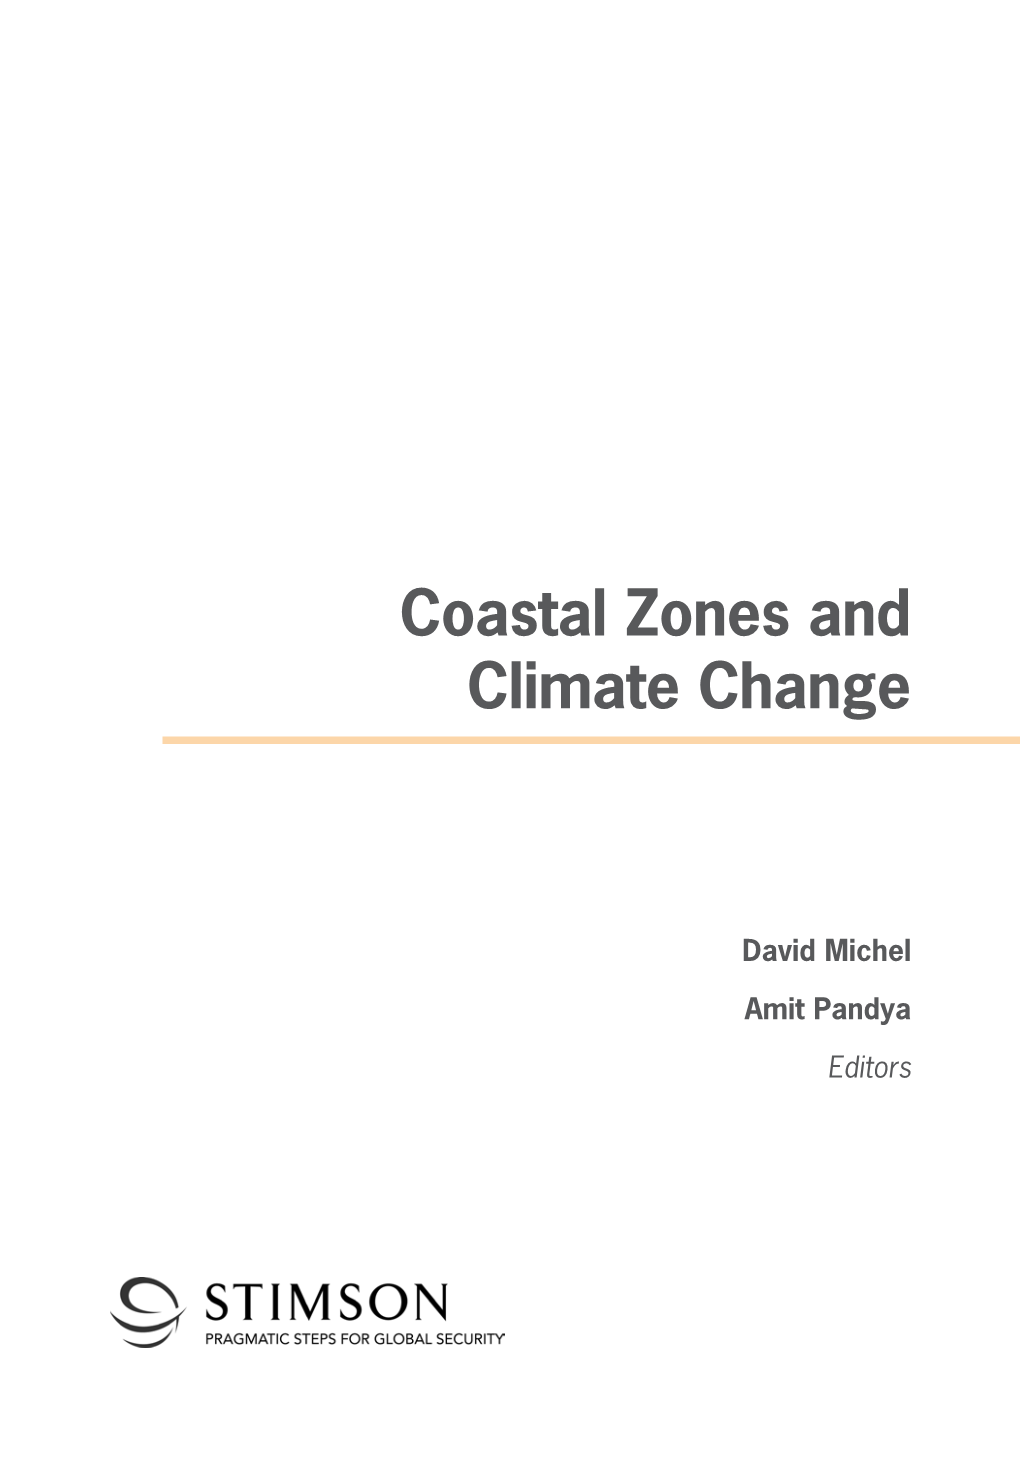 Coastal Zones and Climate Change